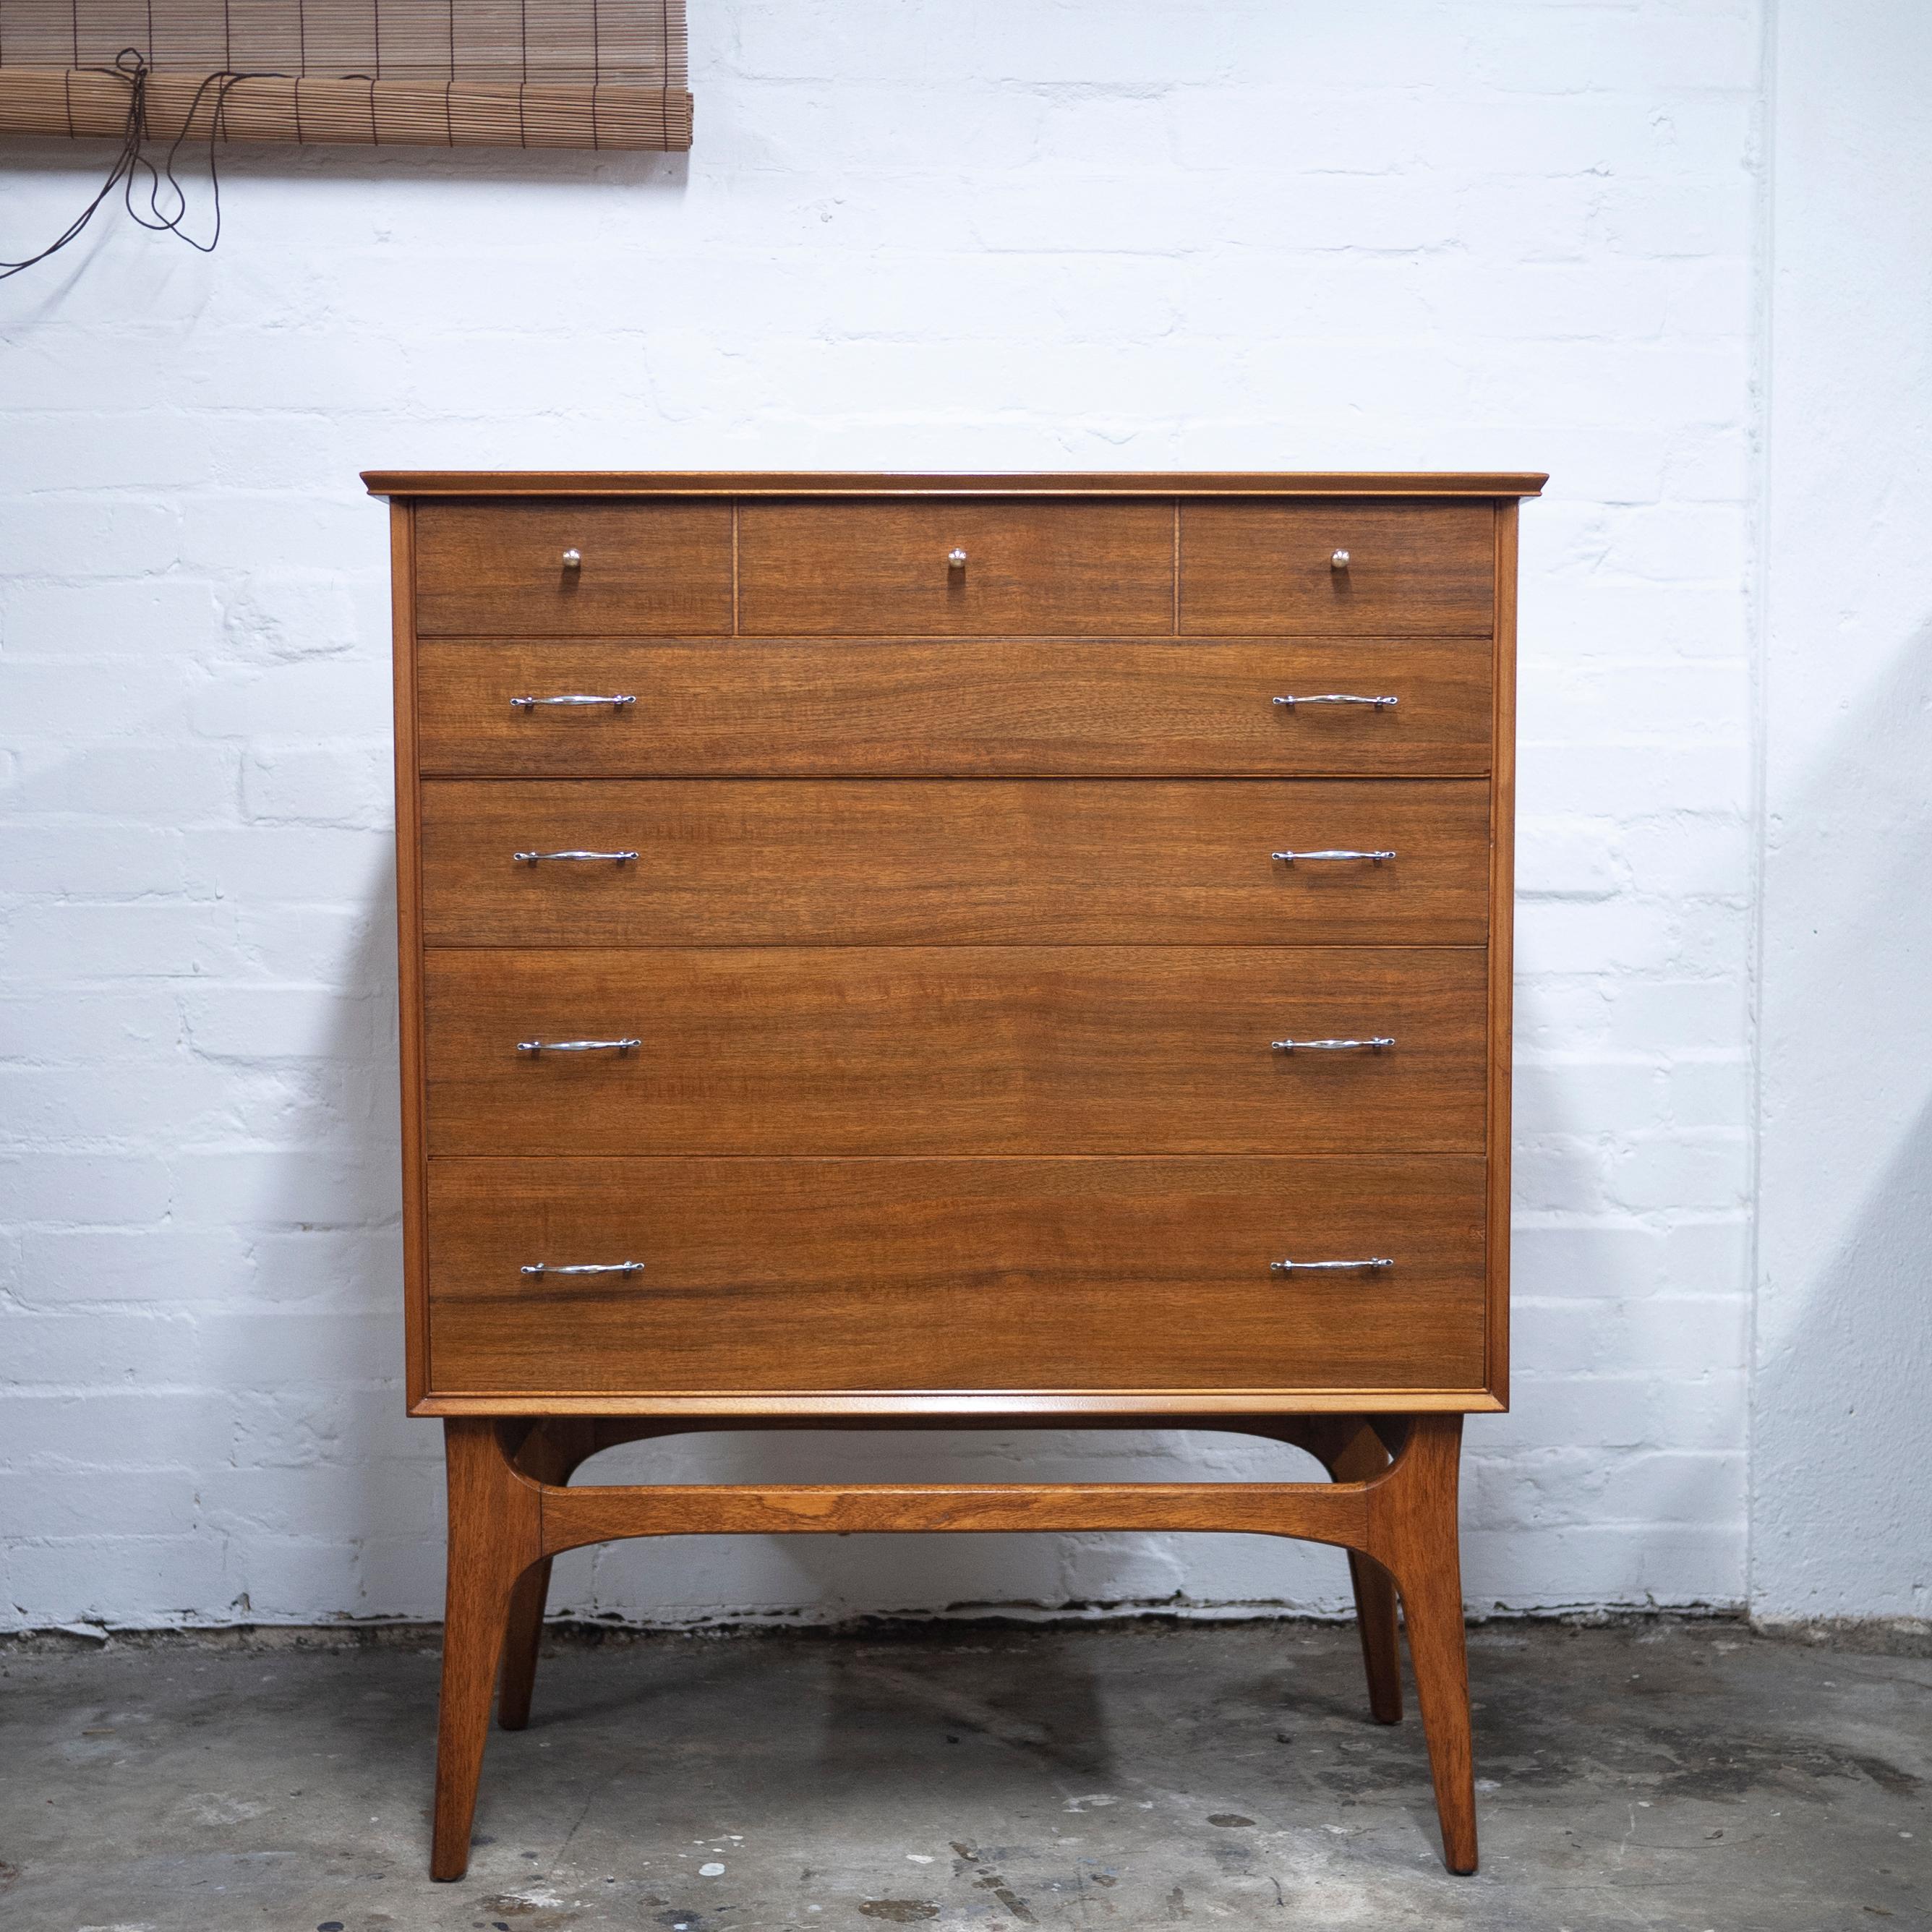 A vintage walnut veneer and teak and five drawer chest of drawers by Alfred COX.

Manufacturer - Alfred COX

Design Period - 1950 to 1959

Country of Manufacture - U.K

Style - midcentury

Detailed Condition - Good with minimal